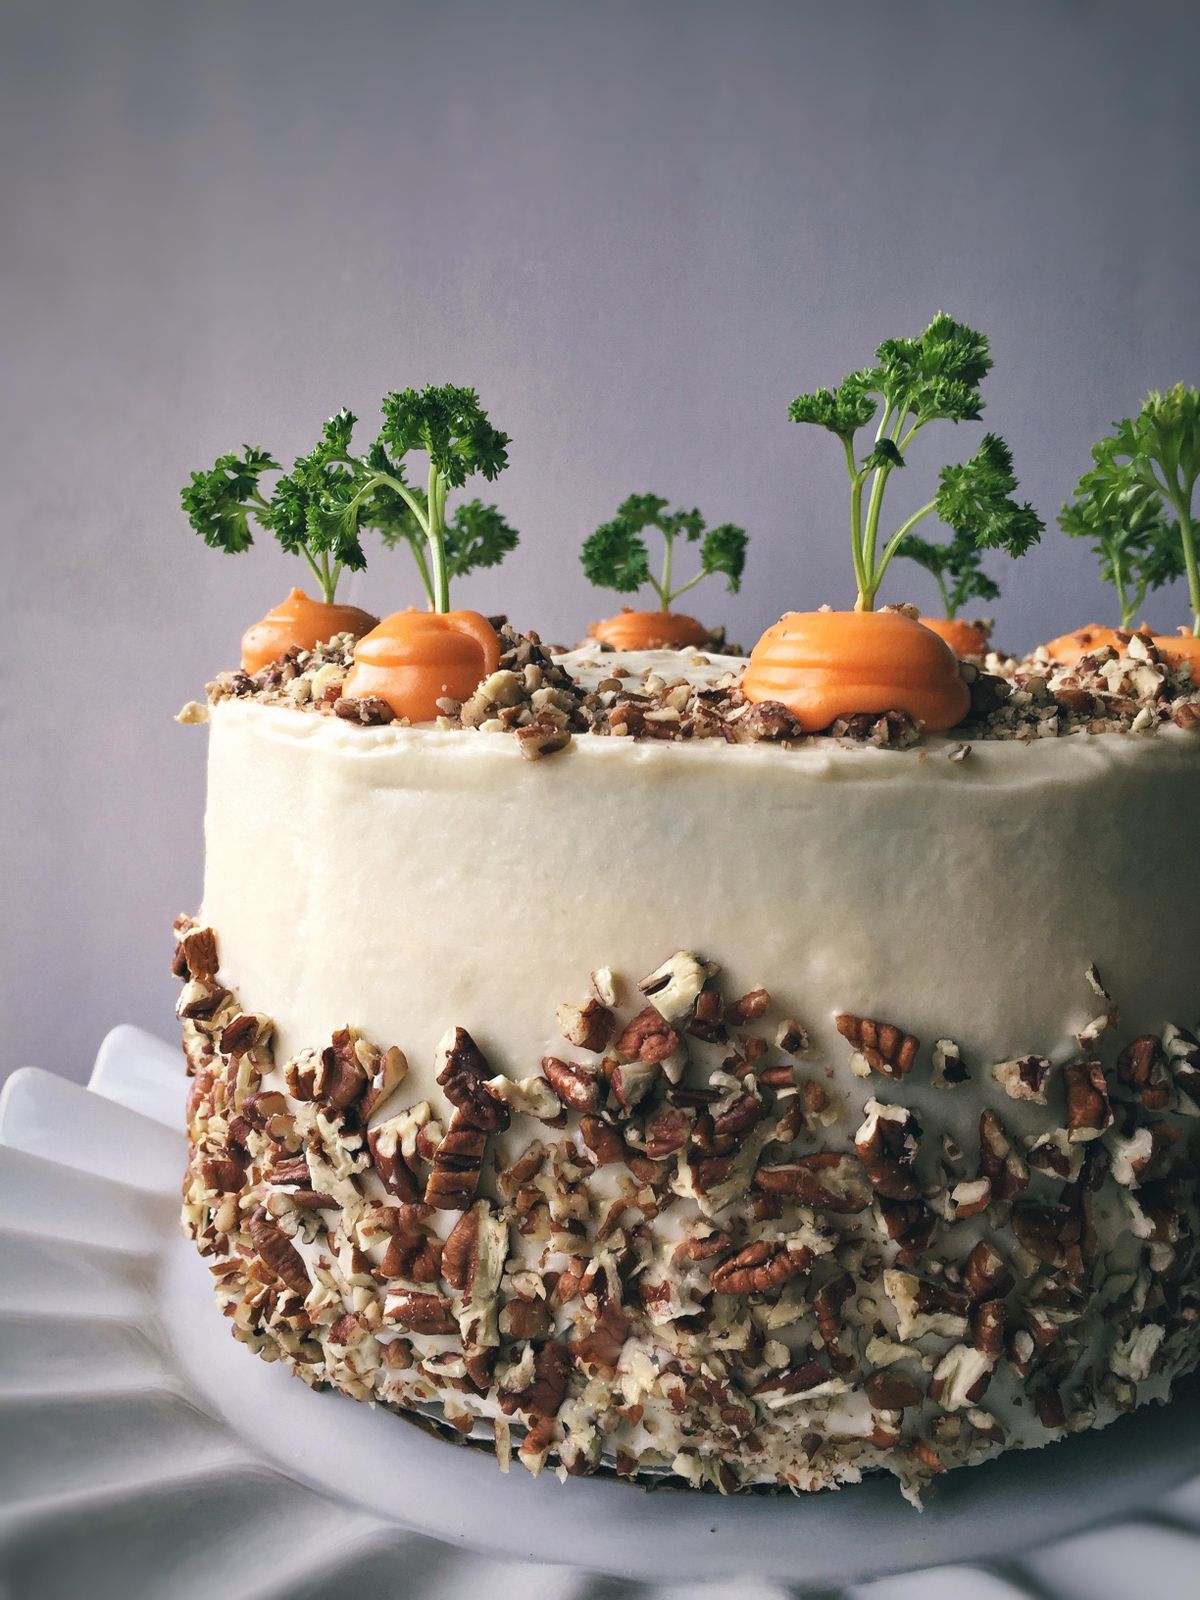 Consider this carrot cake for Easter Sunday. Or, any day. (Audrey Alfaro)